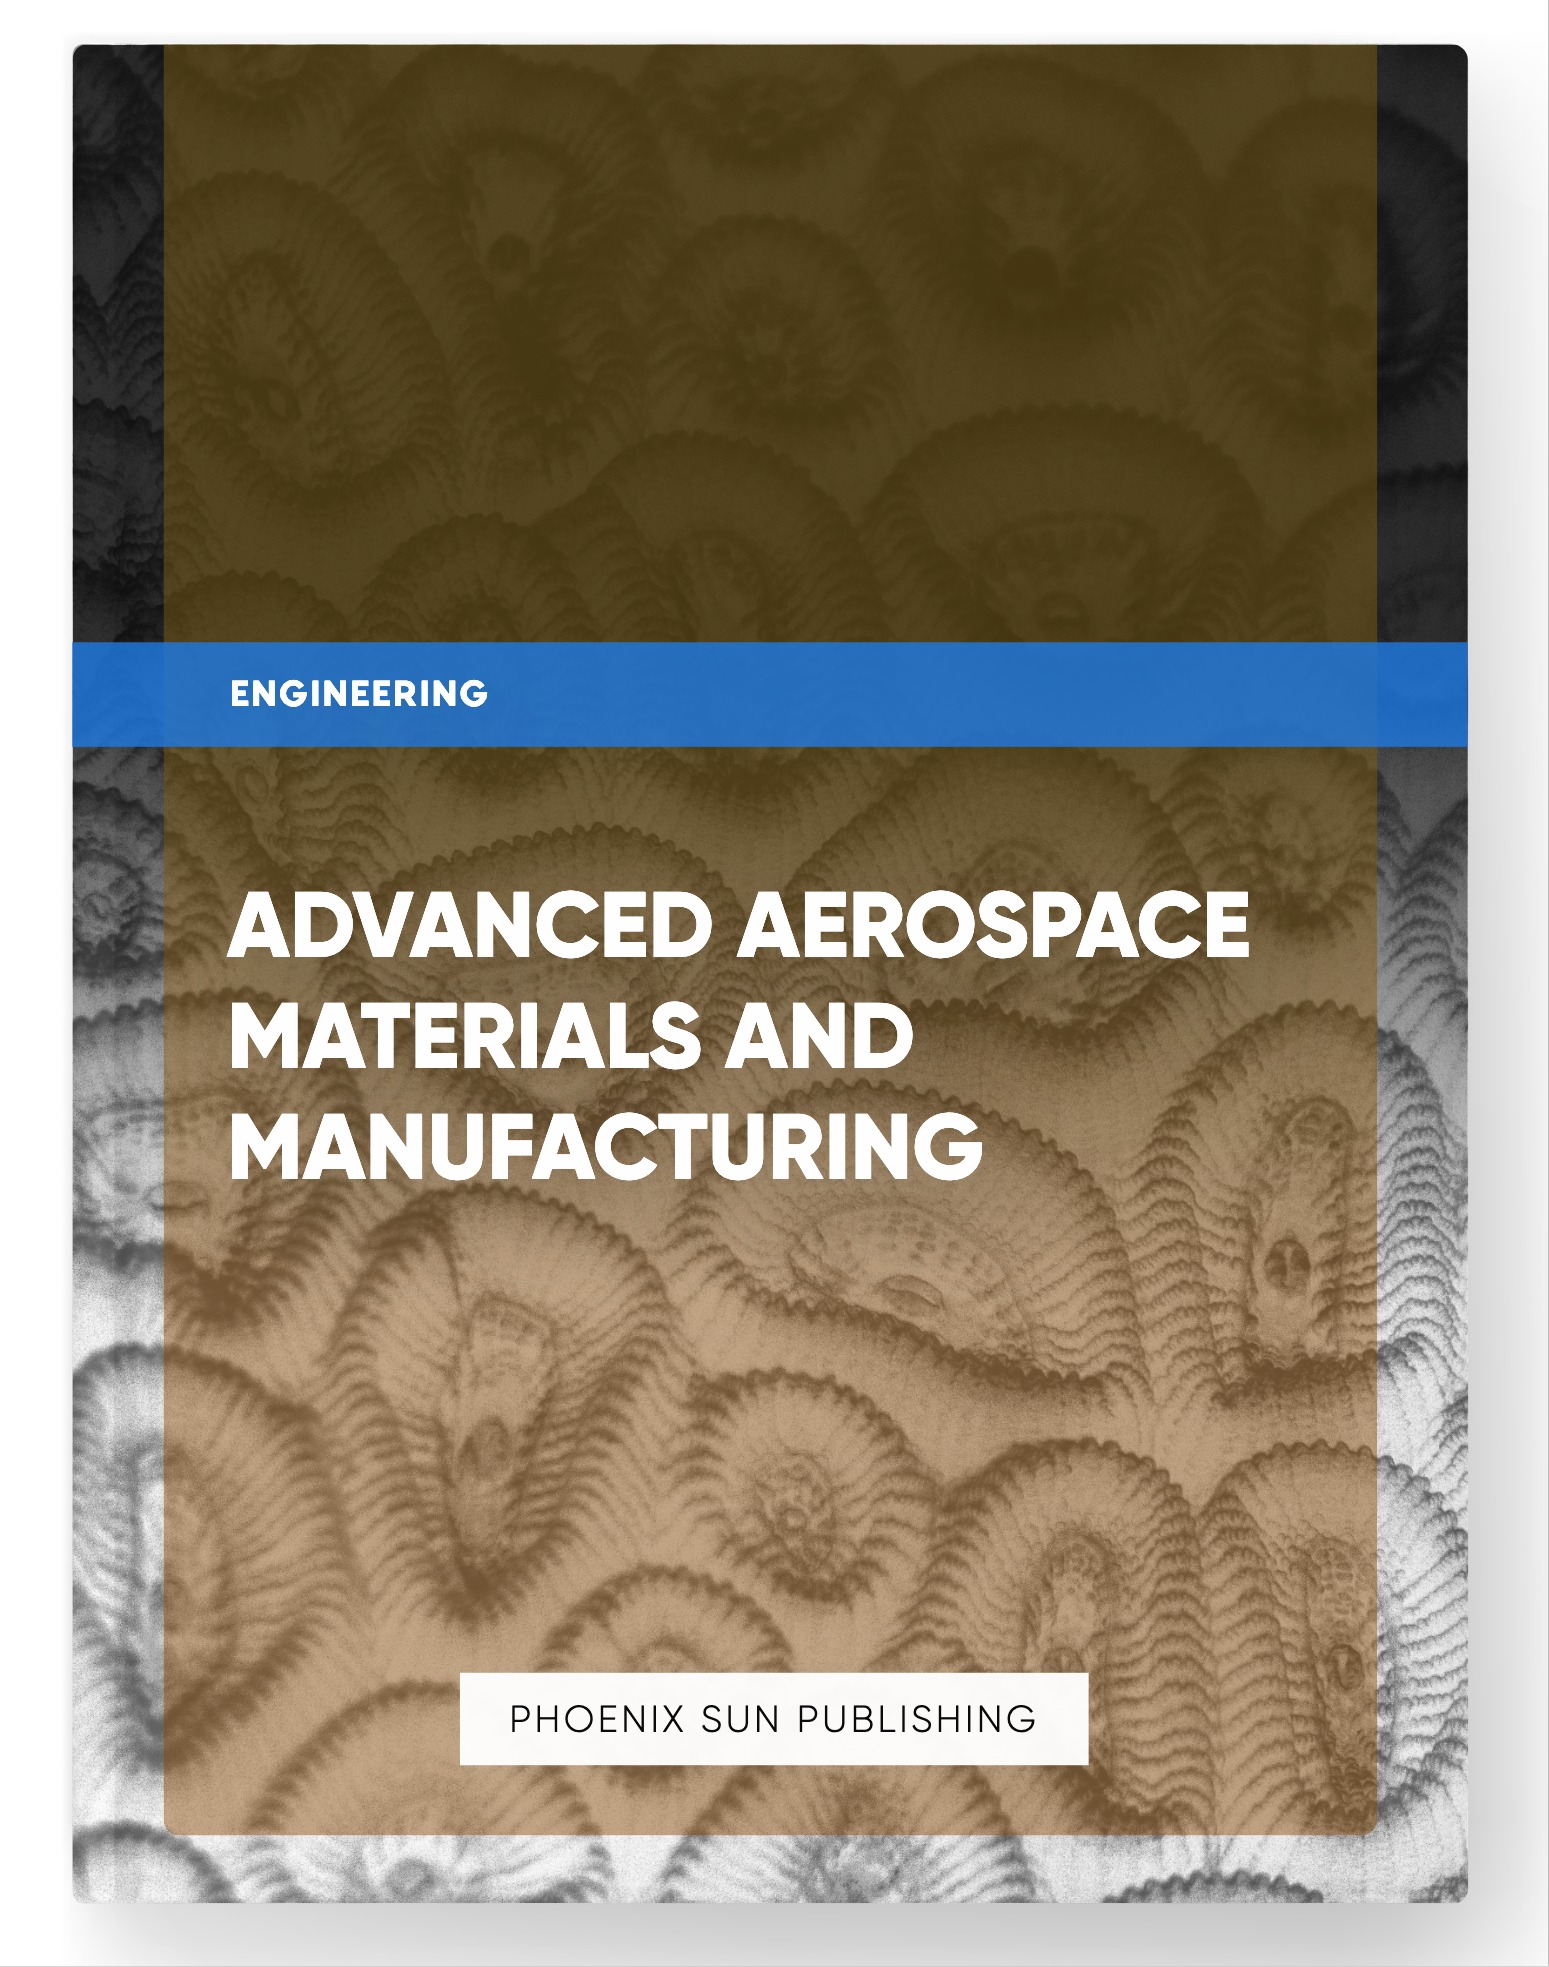 Advanced Aerospace Materials and Manufacturing